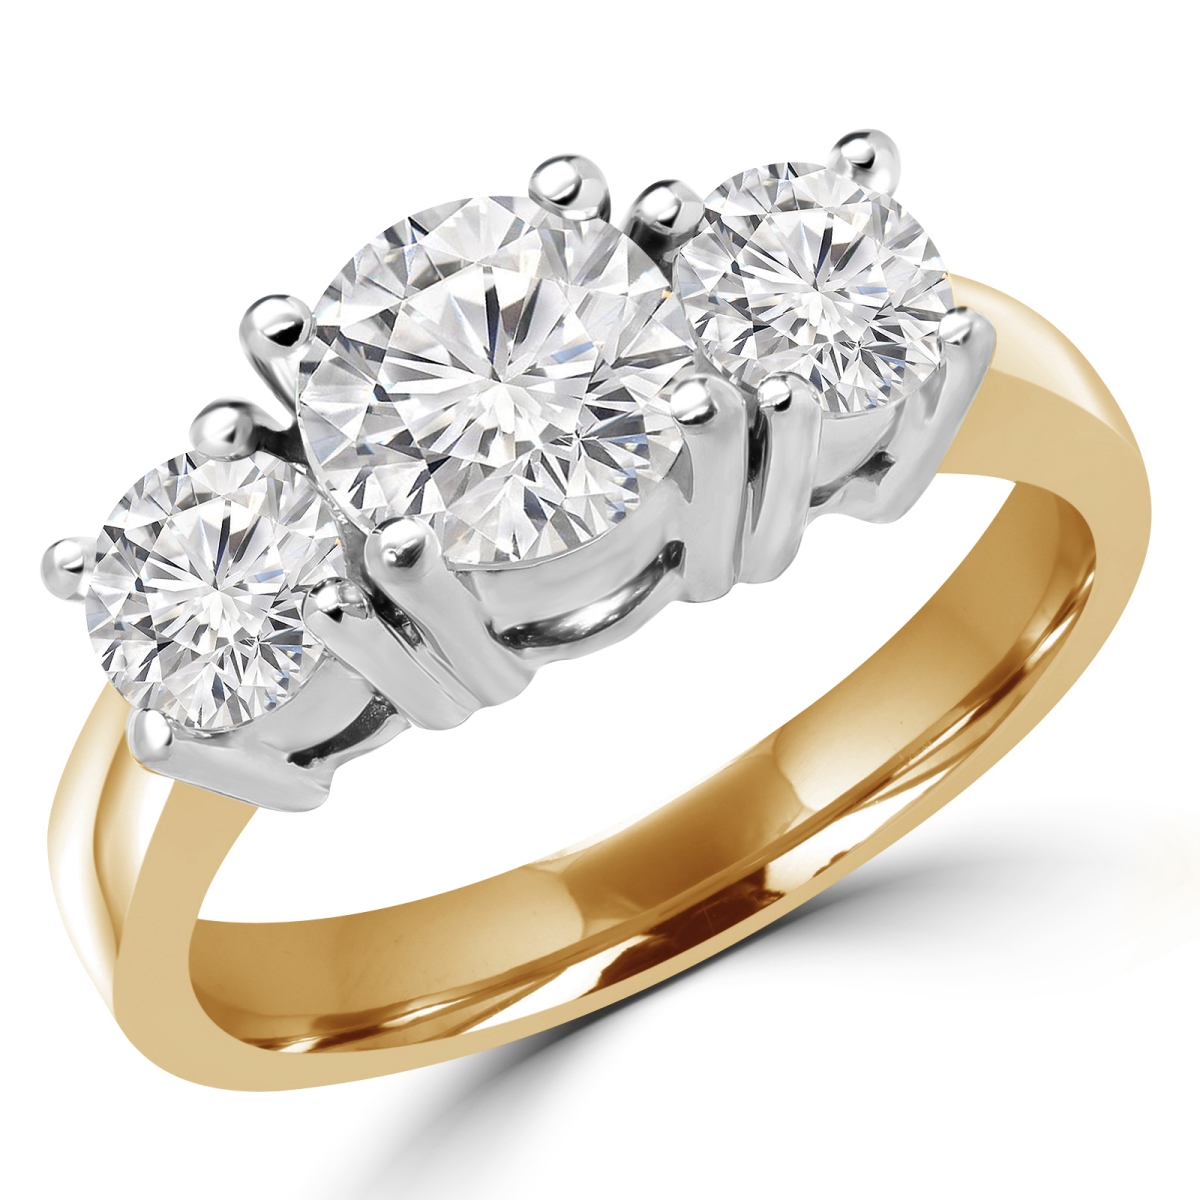 Picture of Majesty Diamonds MD170091-3 1.1 CTW Round Diamond Three-Stone Engagement Ring in 14K Yellow Gold - Size 3